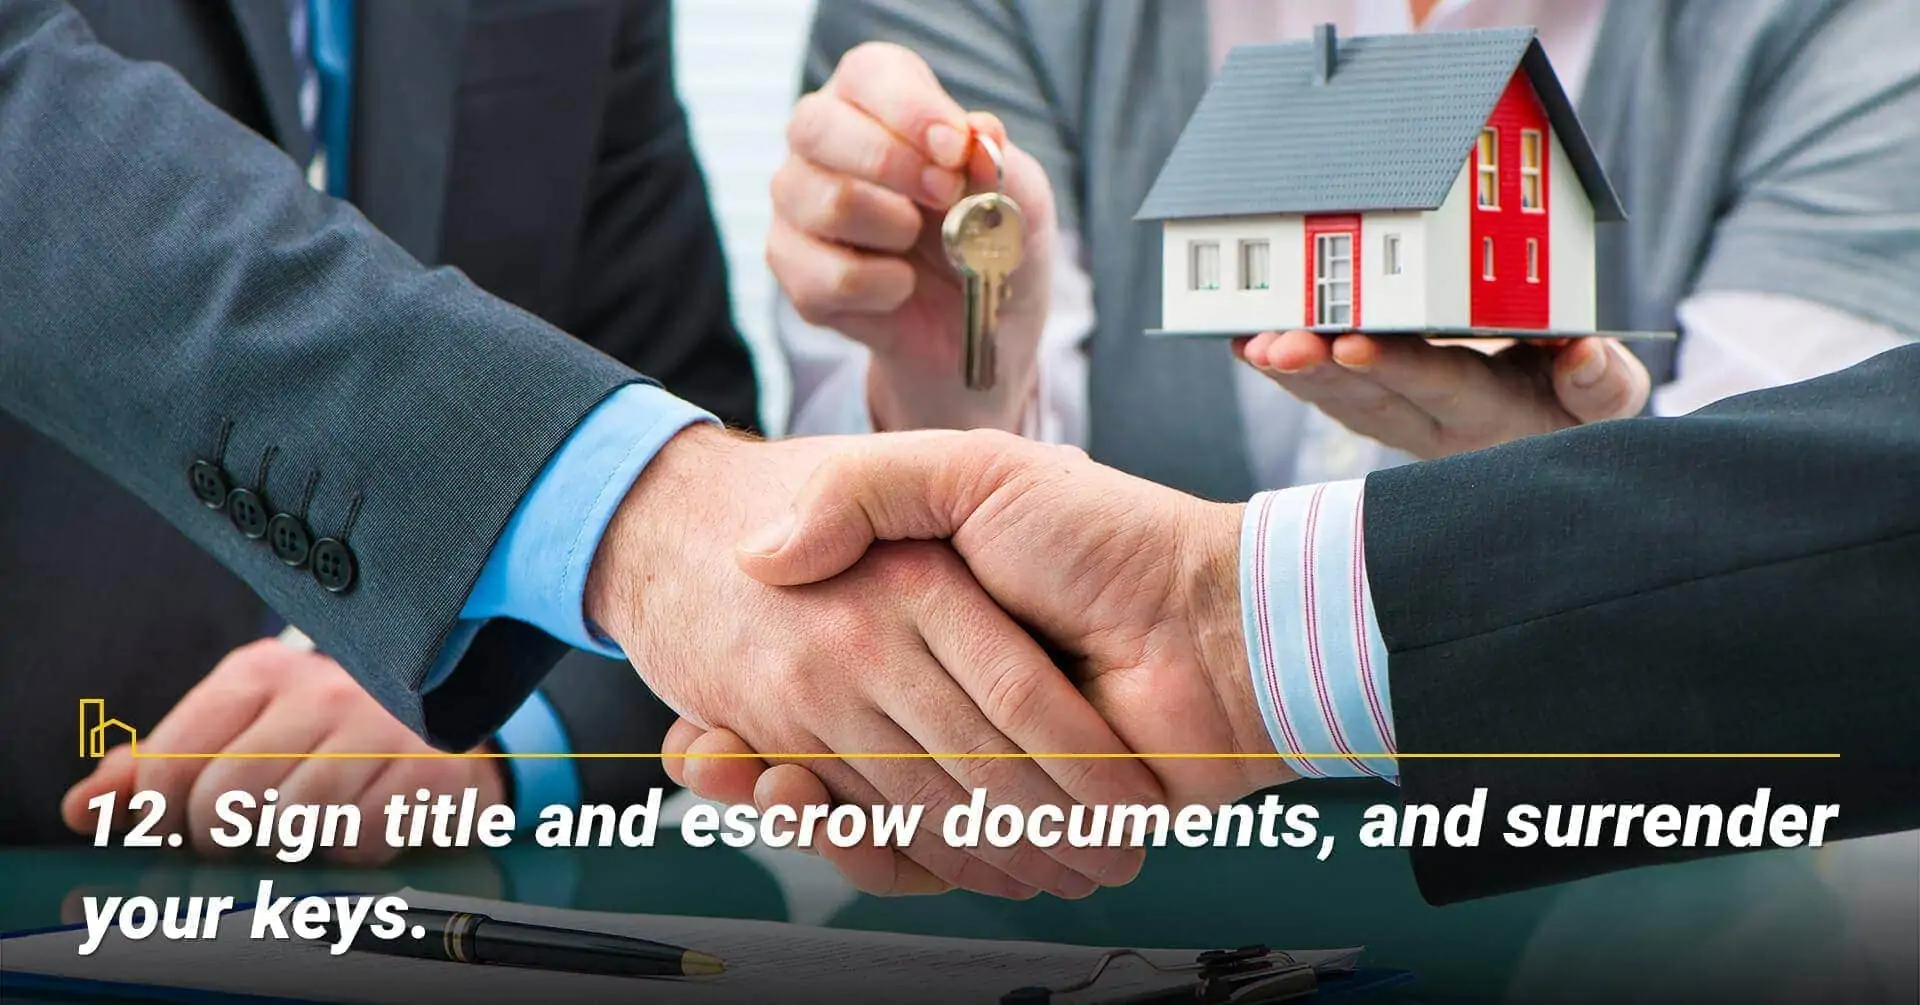 Sign title and escrow documents, and surrender your keys, sign final documents and hand over your keys